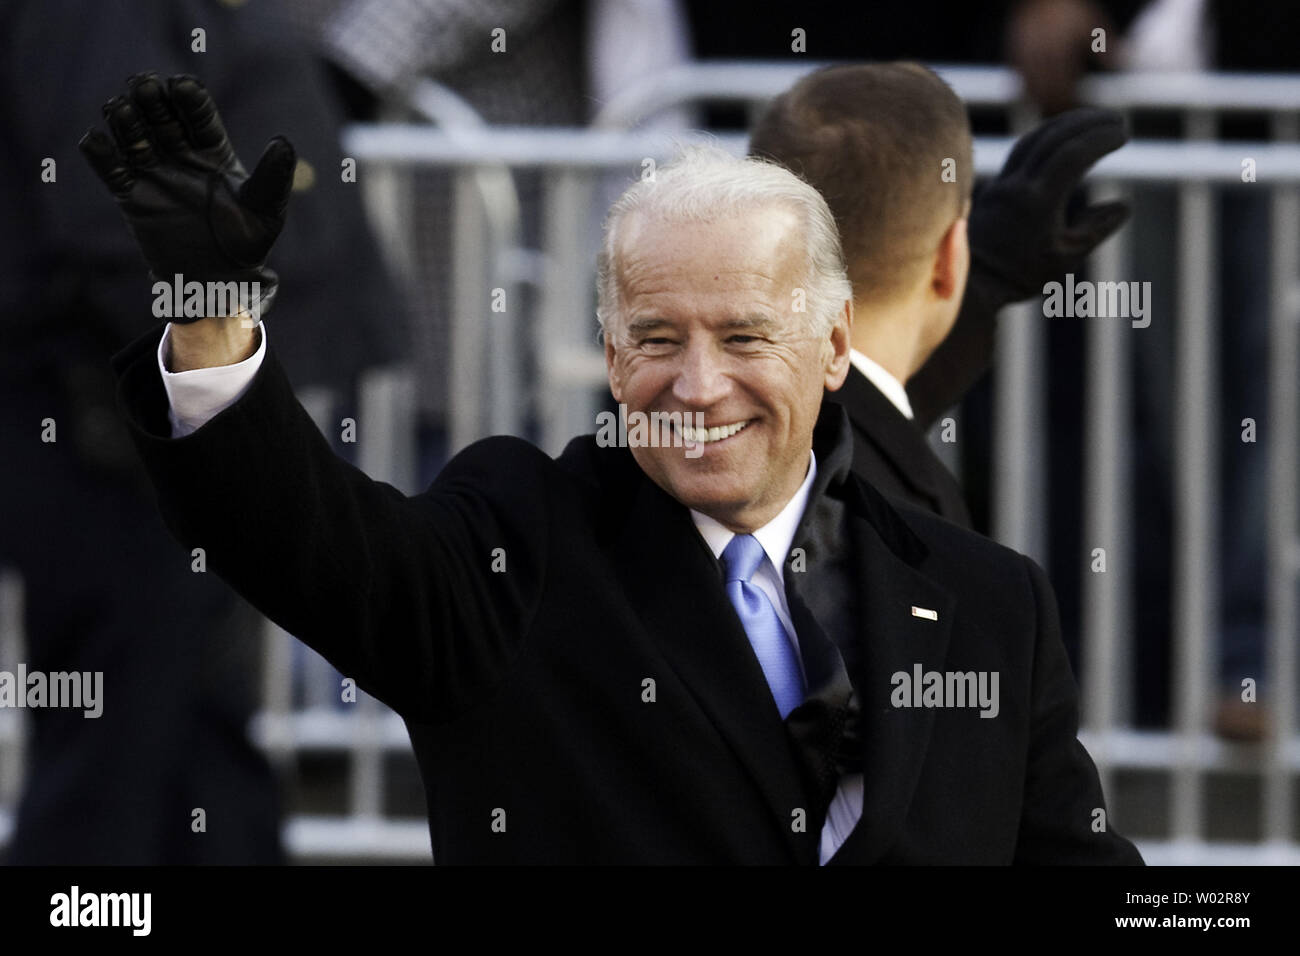 Vice President Joe Biden waves to the crowd at Freedom Plaza in Washington on January 20, 2009.  Barack Obama was sworn in as the 44th President of the United States of America during his Inauguration Ceremony on Capitol Hill earlier in the day.  (UPI Photo/Patrick D. McDermott) Stock Photo